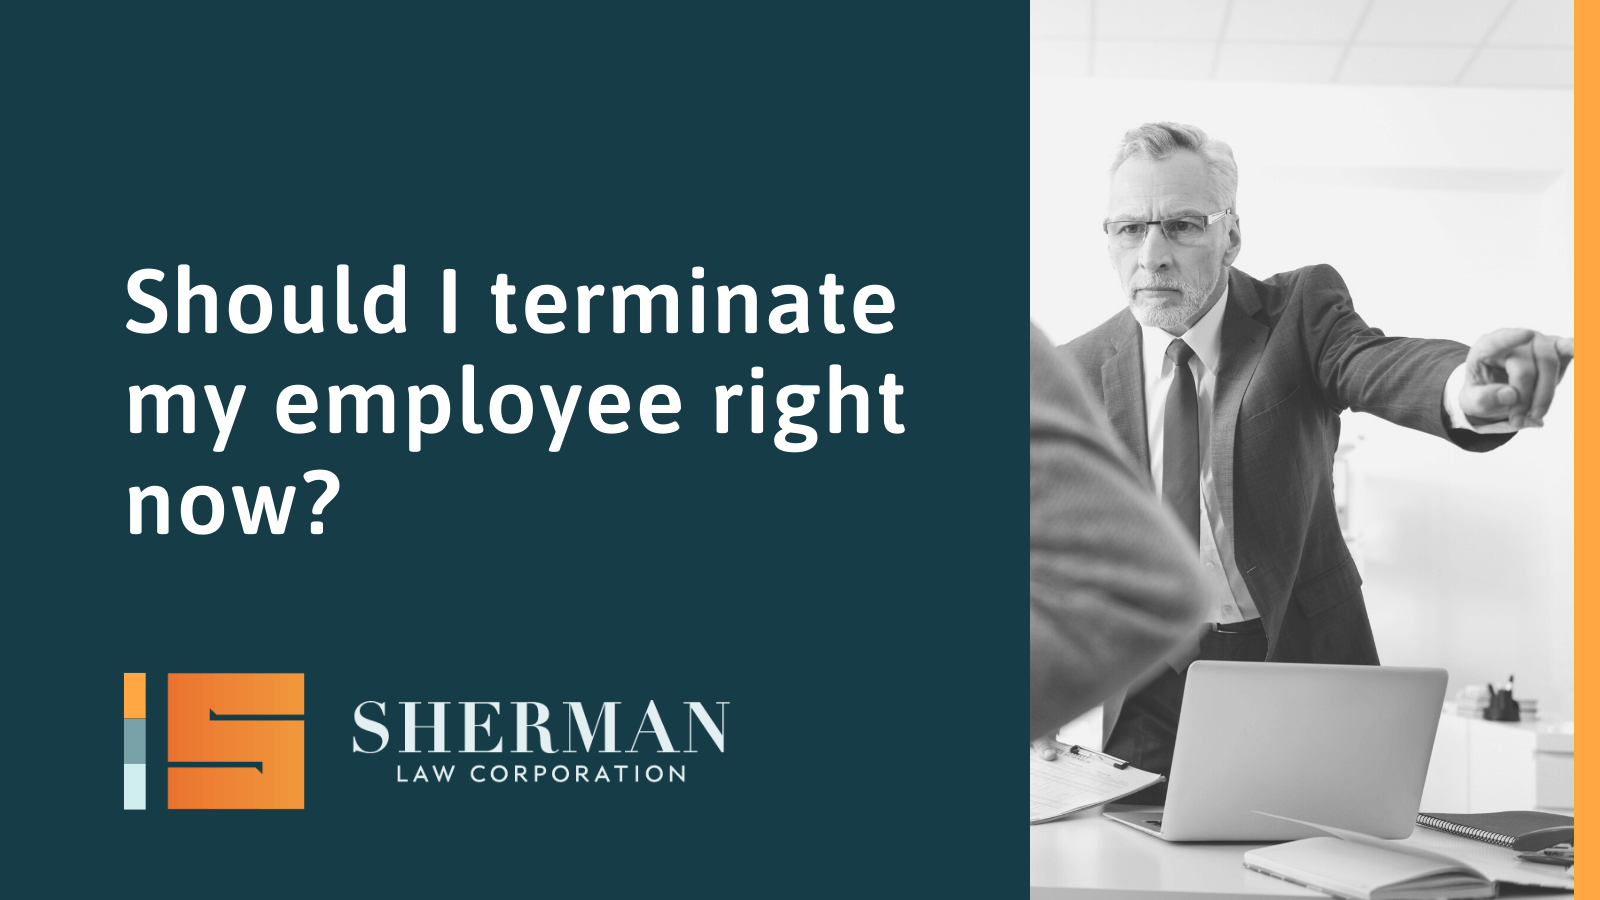 Should I terminate my employee right now - california employment lawyer - sherman law corporation